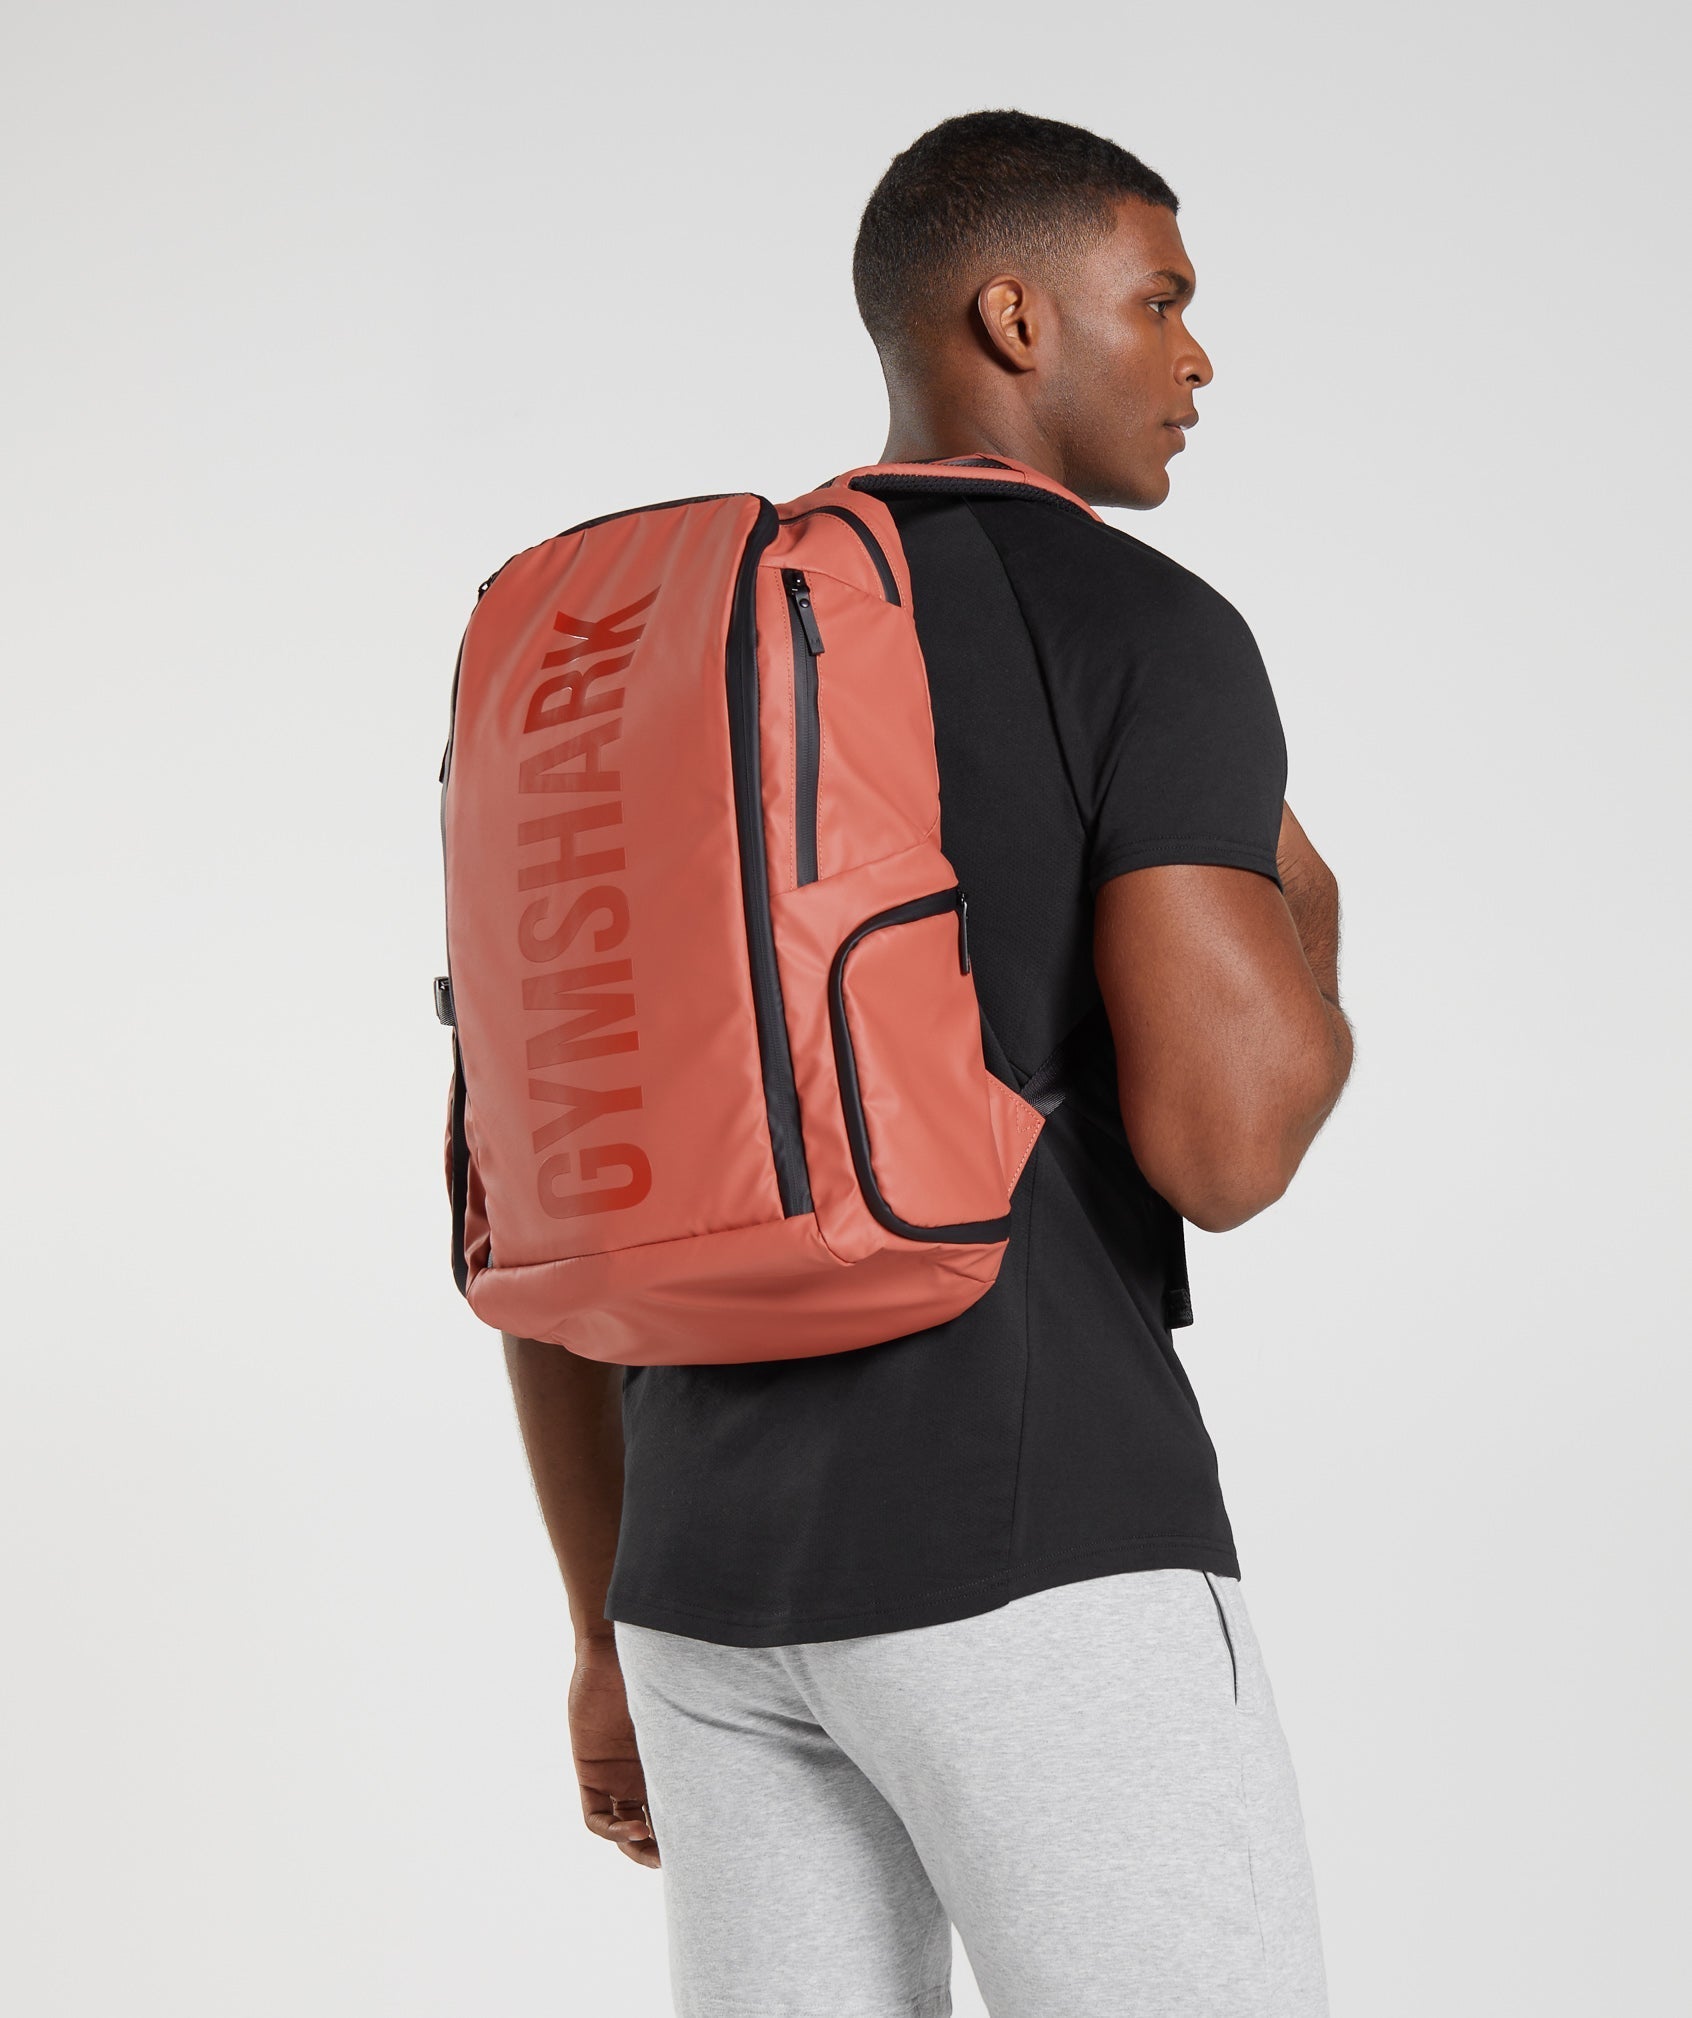 X-Series 0.3 Backpack in Persimmon Red - view 2